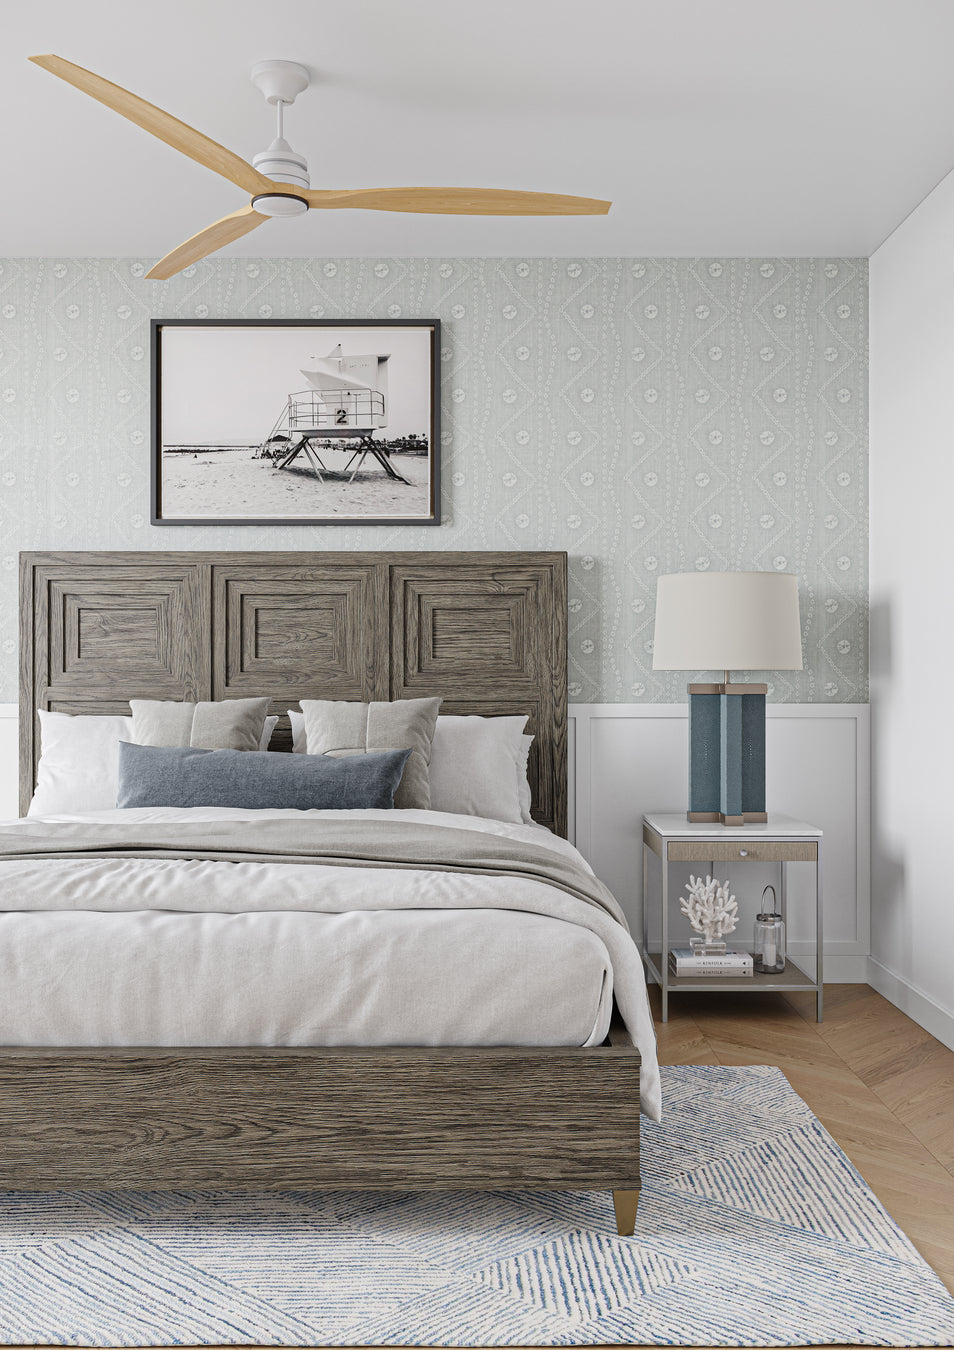 A serene and elegant bedroom with Claiborne decor, featuring soft lighting and minimalist design elements.